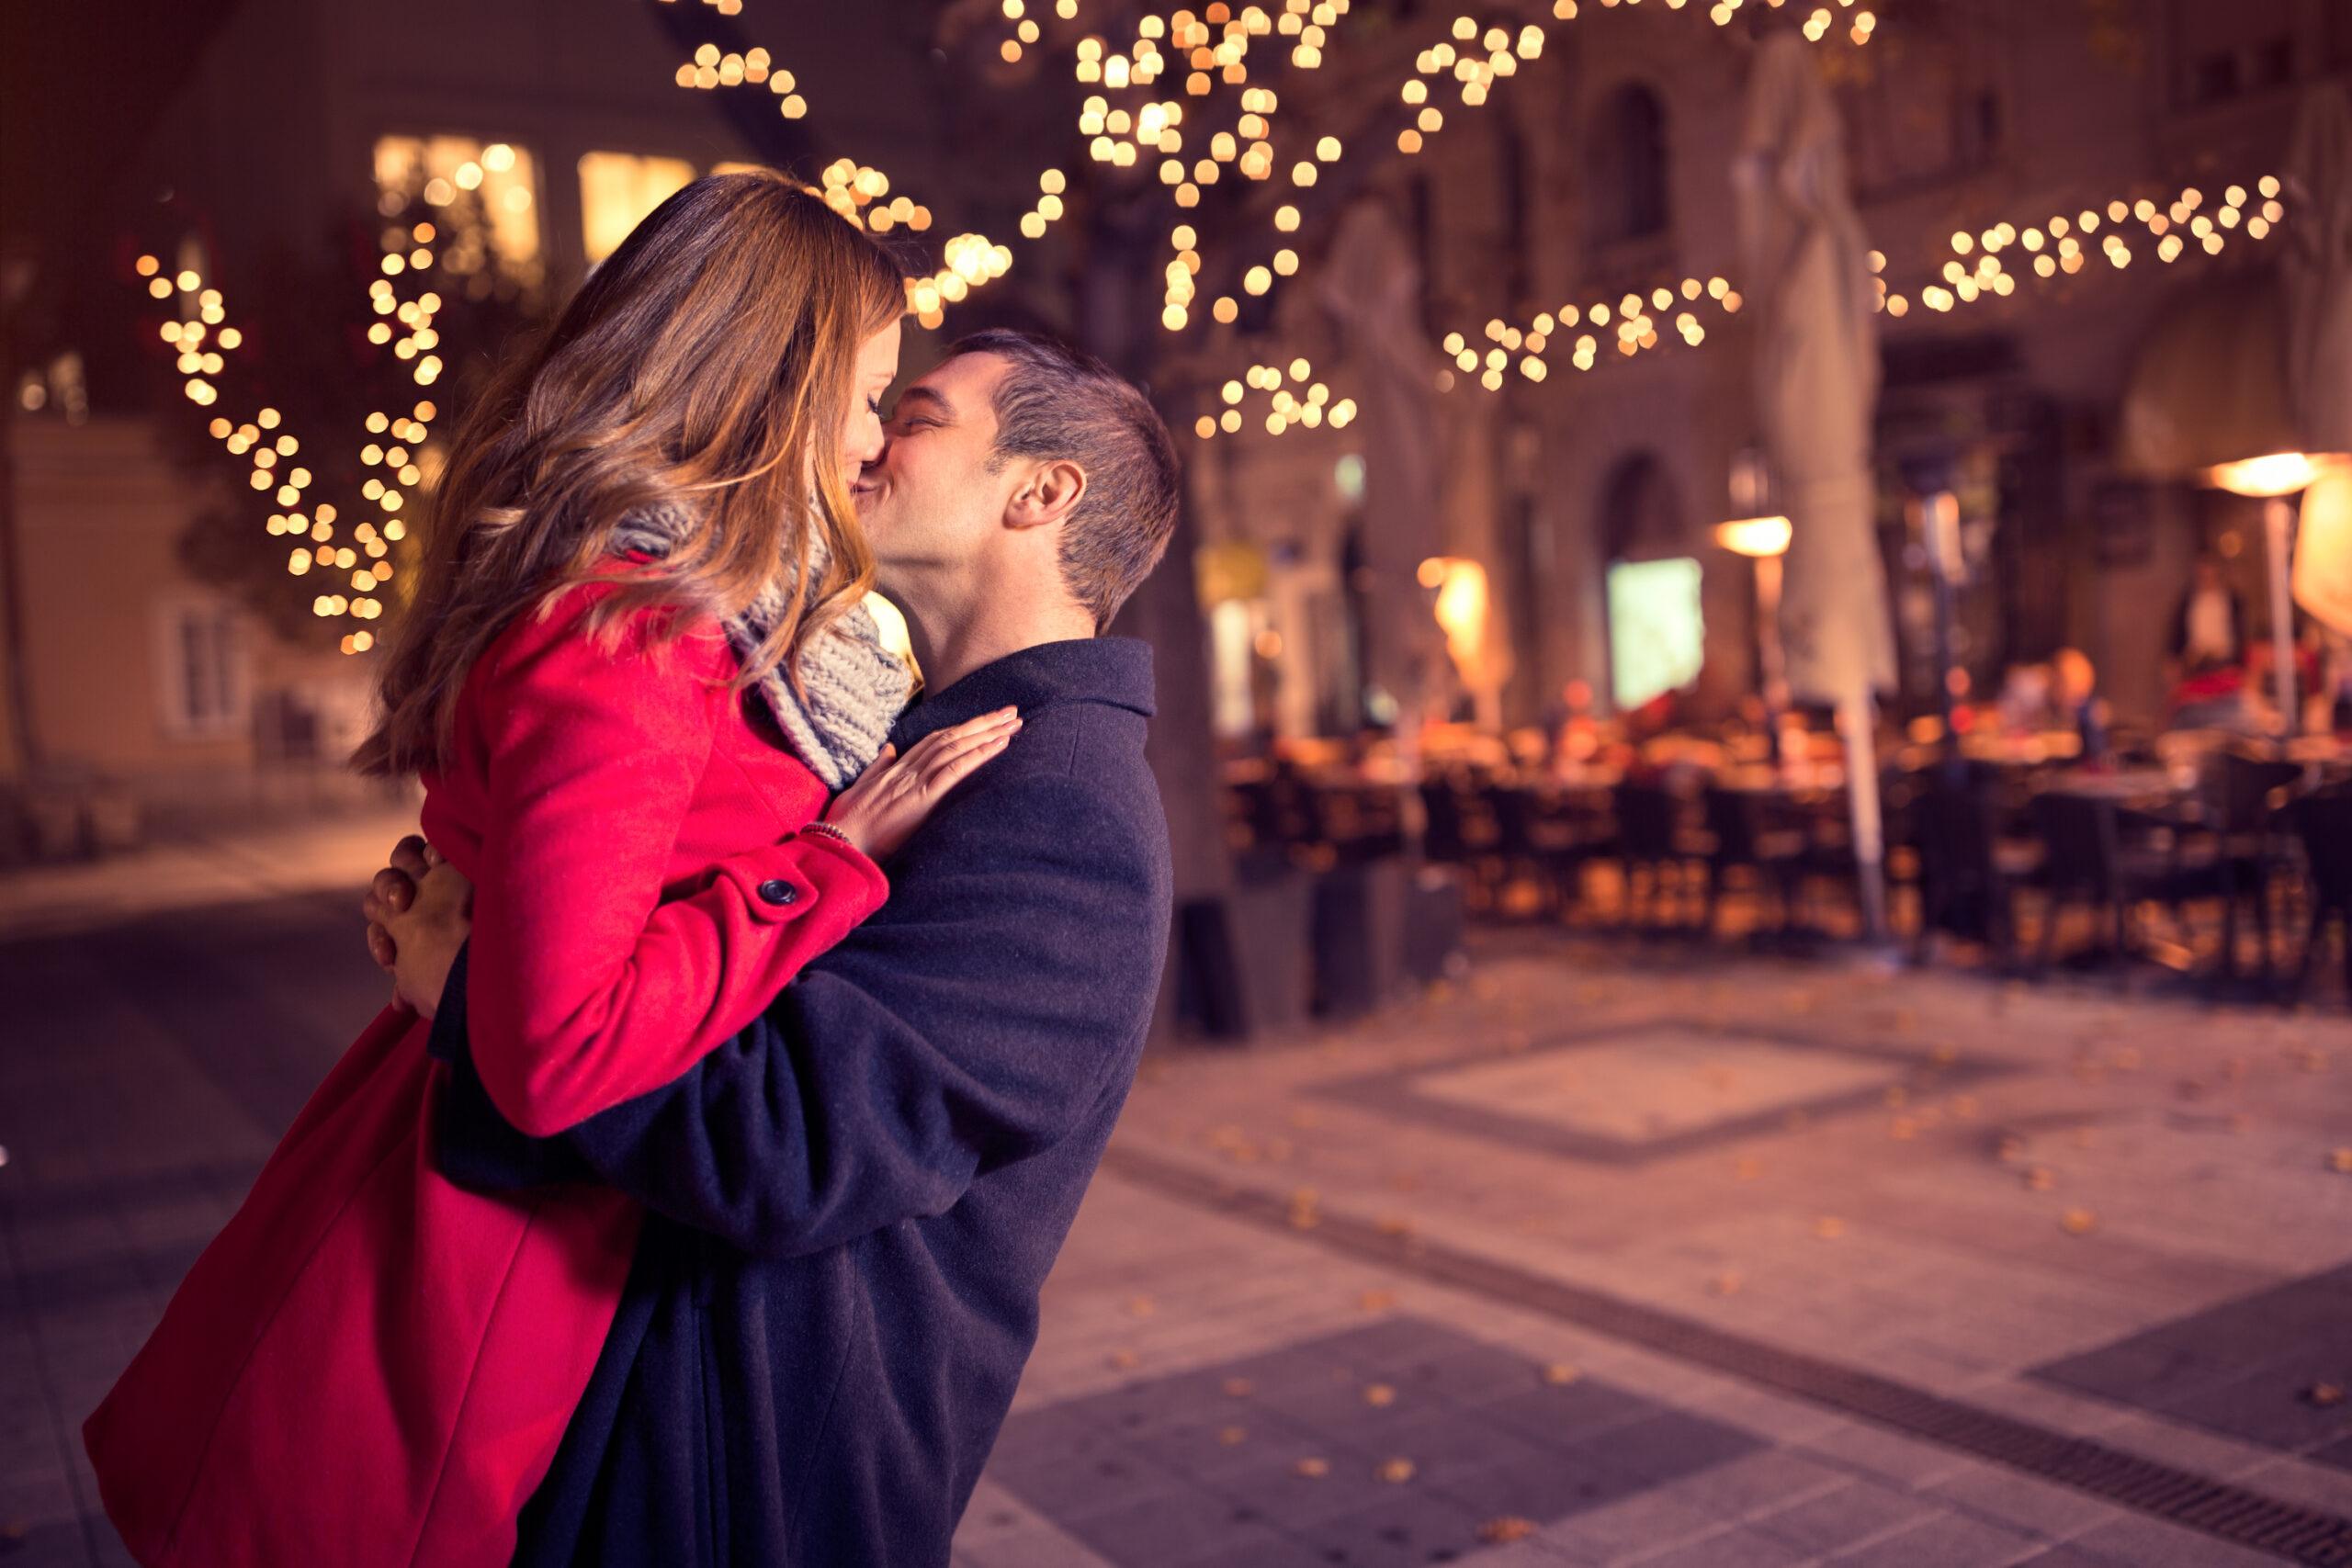 Should You Get Back With an Old Fling When You Go Home for the Holidays?